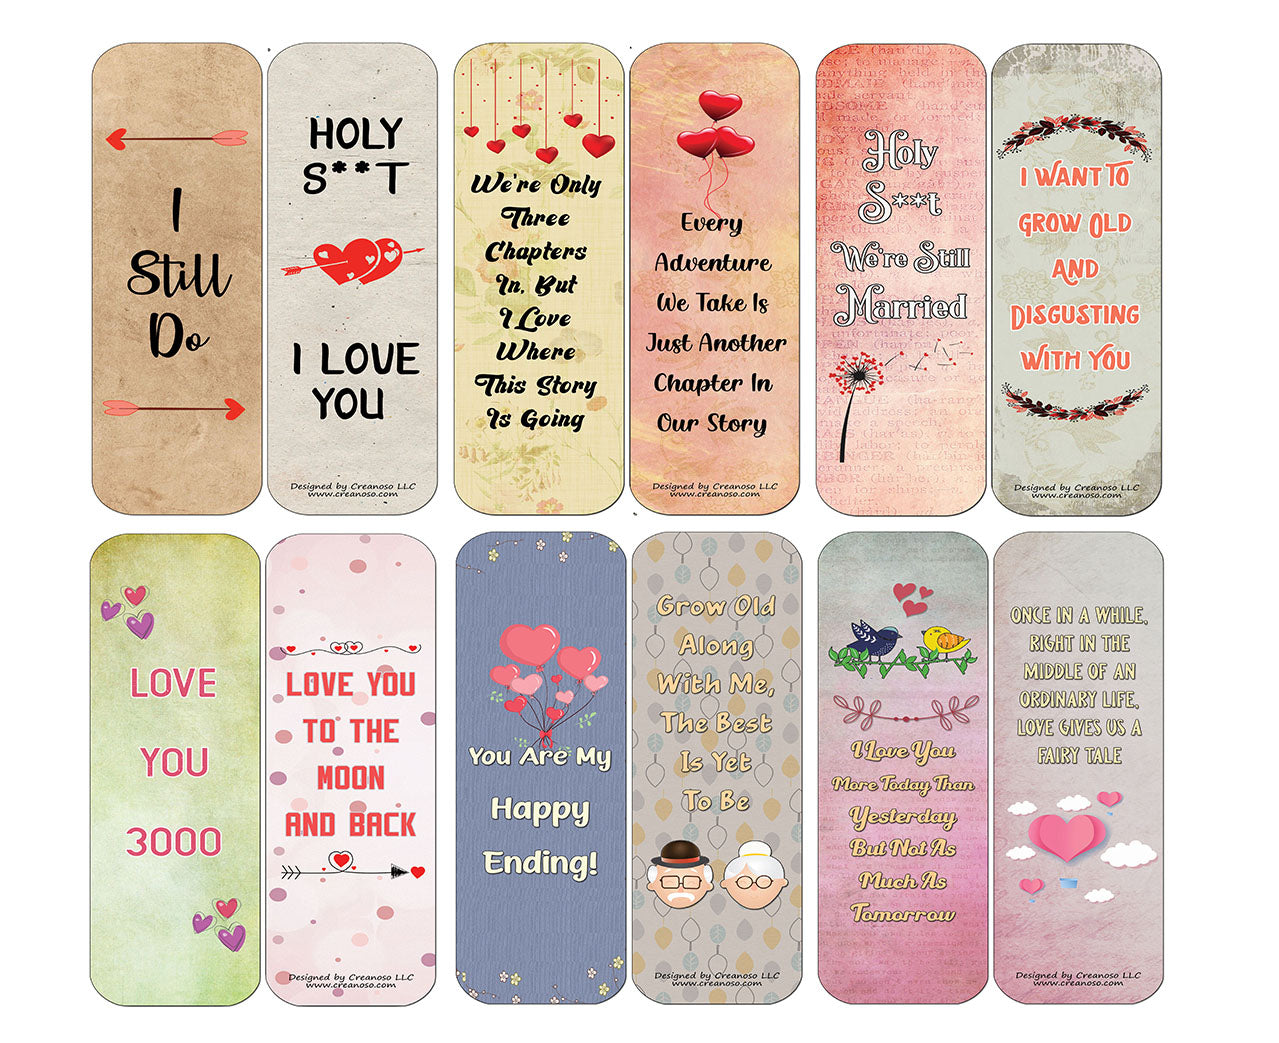 Creanoso Anniversary Bookmark Cards (60-Pack) - Premium Quality Gift Ideas for Children, Teens, & Adults for All Occasions - Stocking Stuffers Party Favor & Giveaways